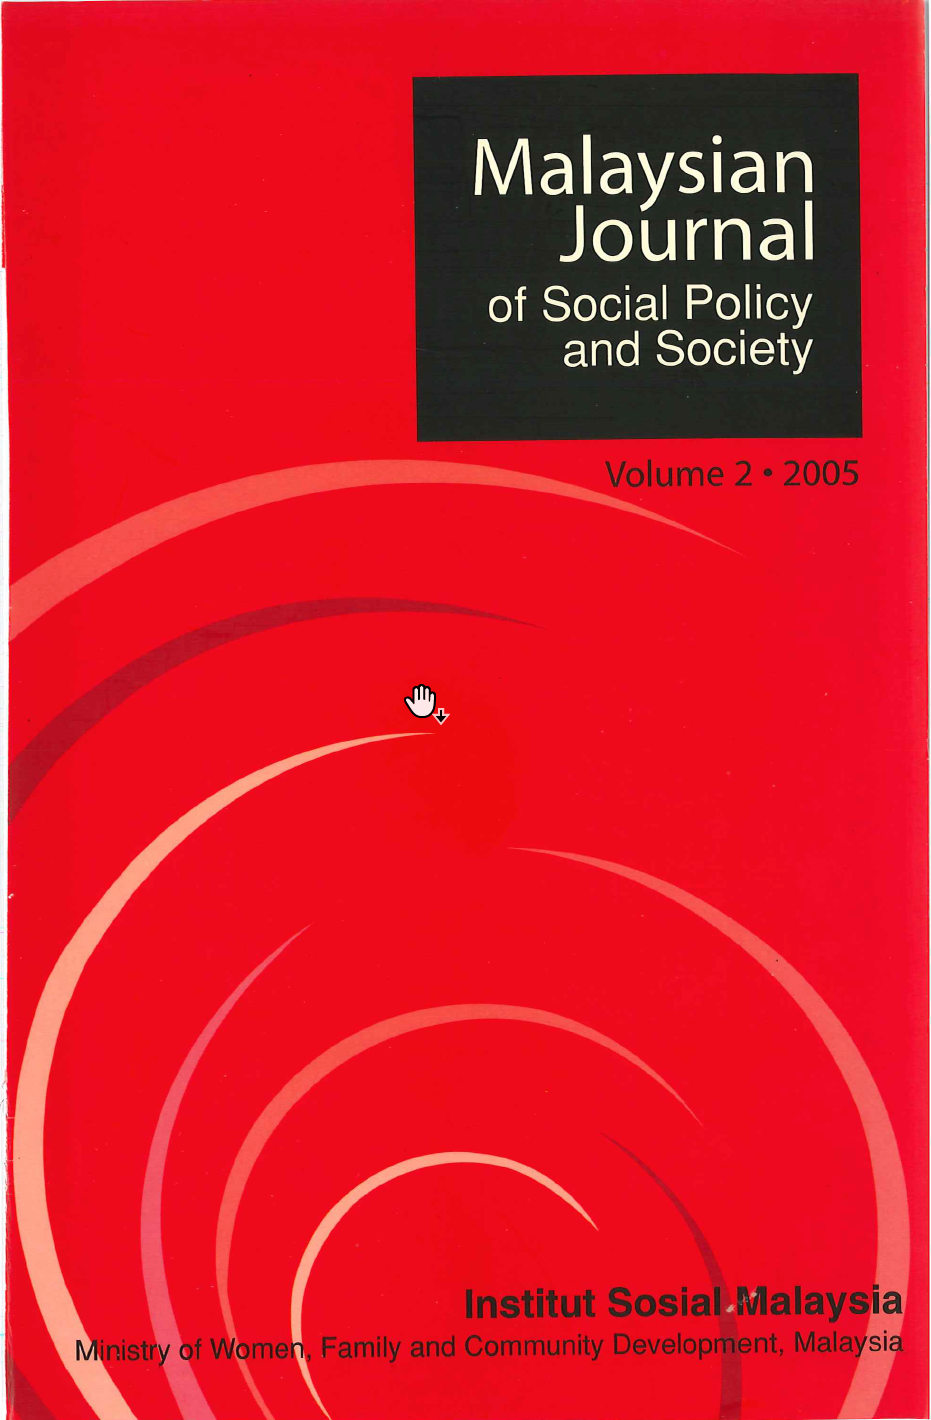 					View Vol. 2 (2005): Malaysian Journal of Social Policy and Society Volume 2 2005
				